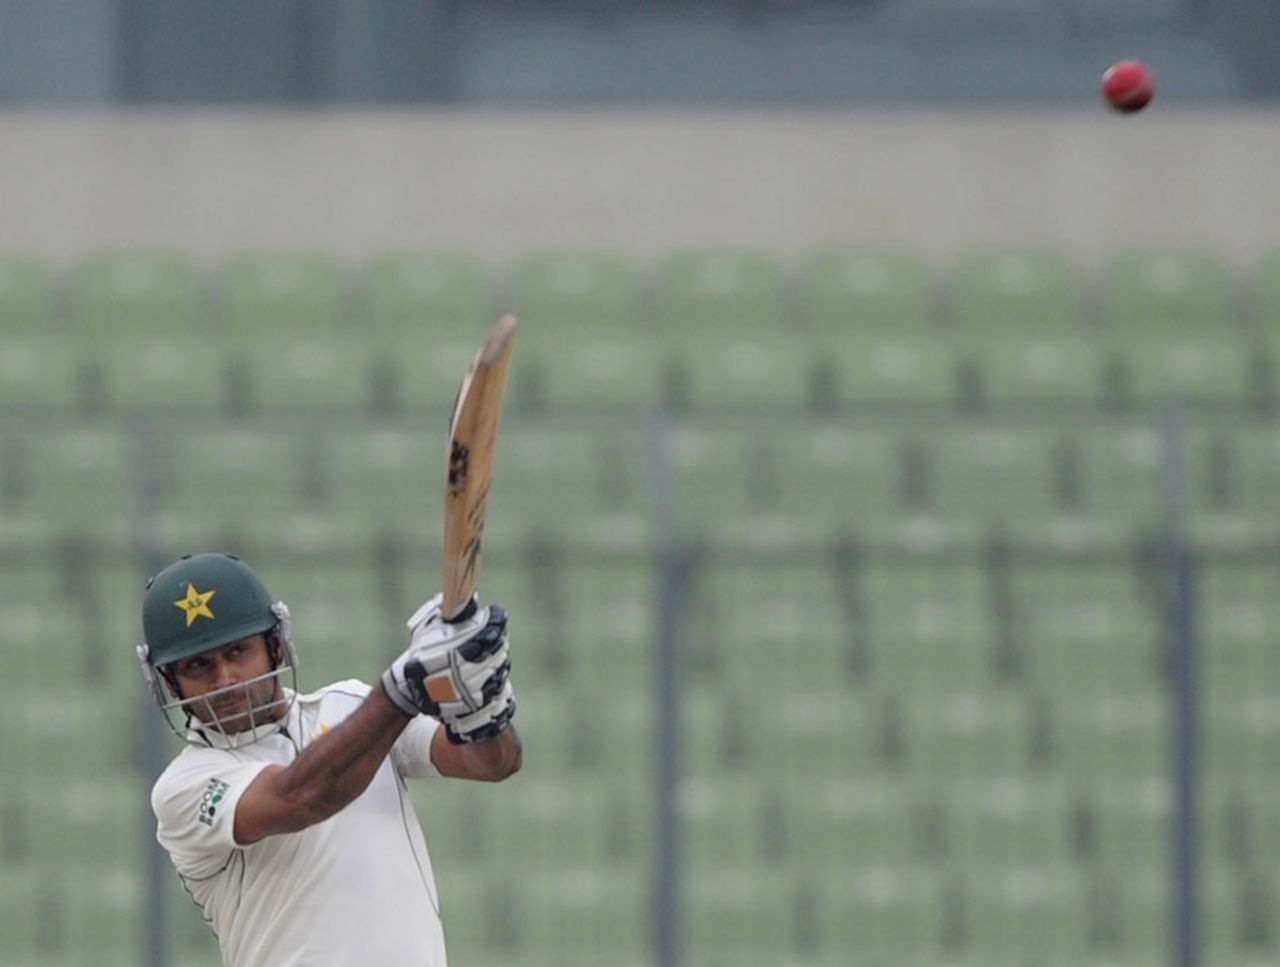 Mohammad Hafeez lofts one down the ground, Bangladesh v Pakistan, 2nd Test, Mirpur, 5th day, December 21, 2011 